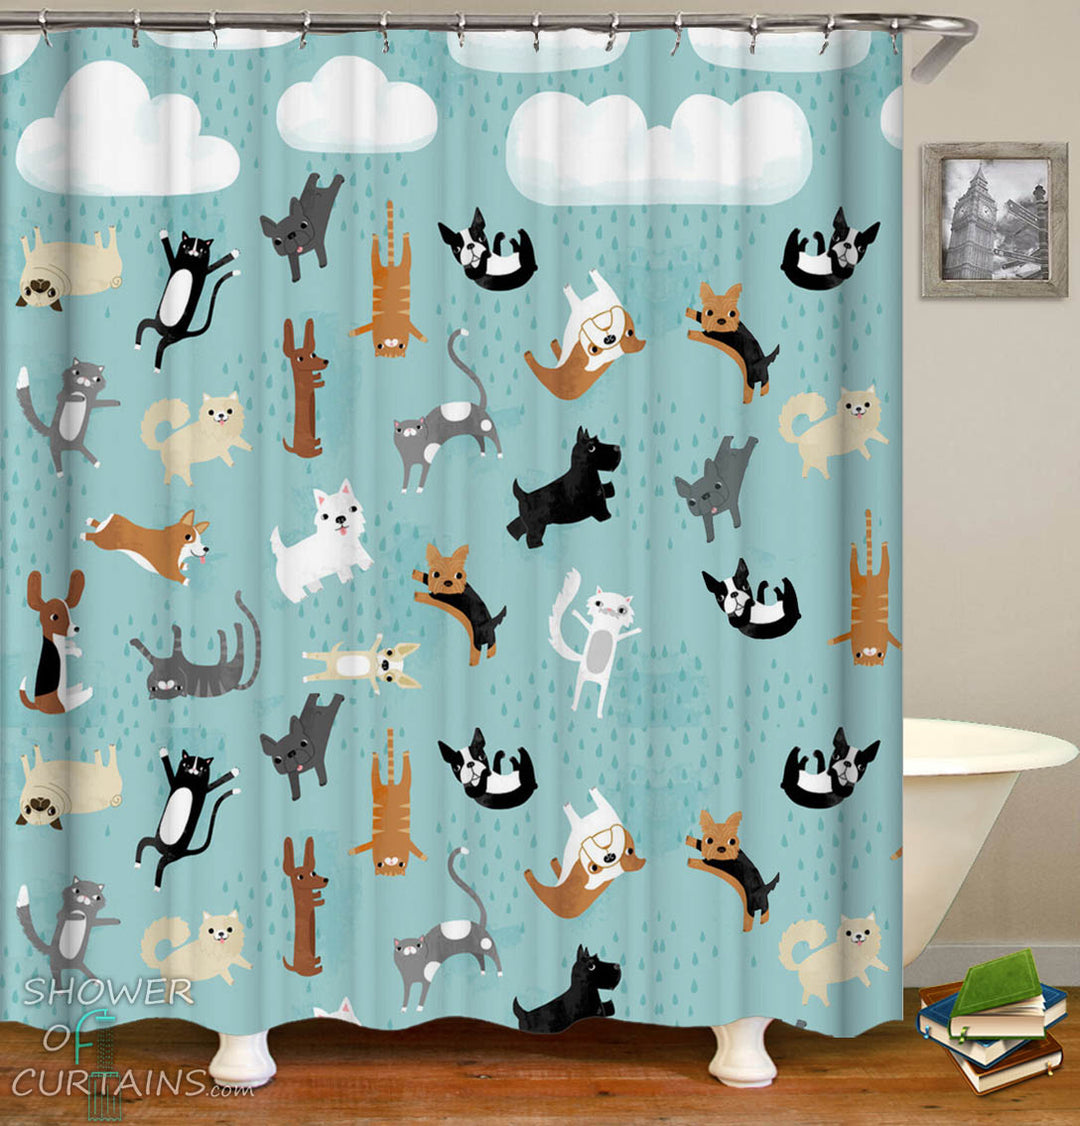 It’s Raining Pets Shower Curtain_Dogs and Cats Shower Curtain